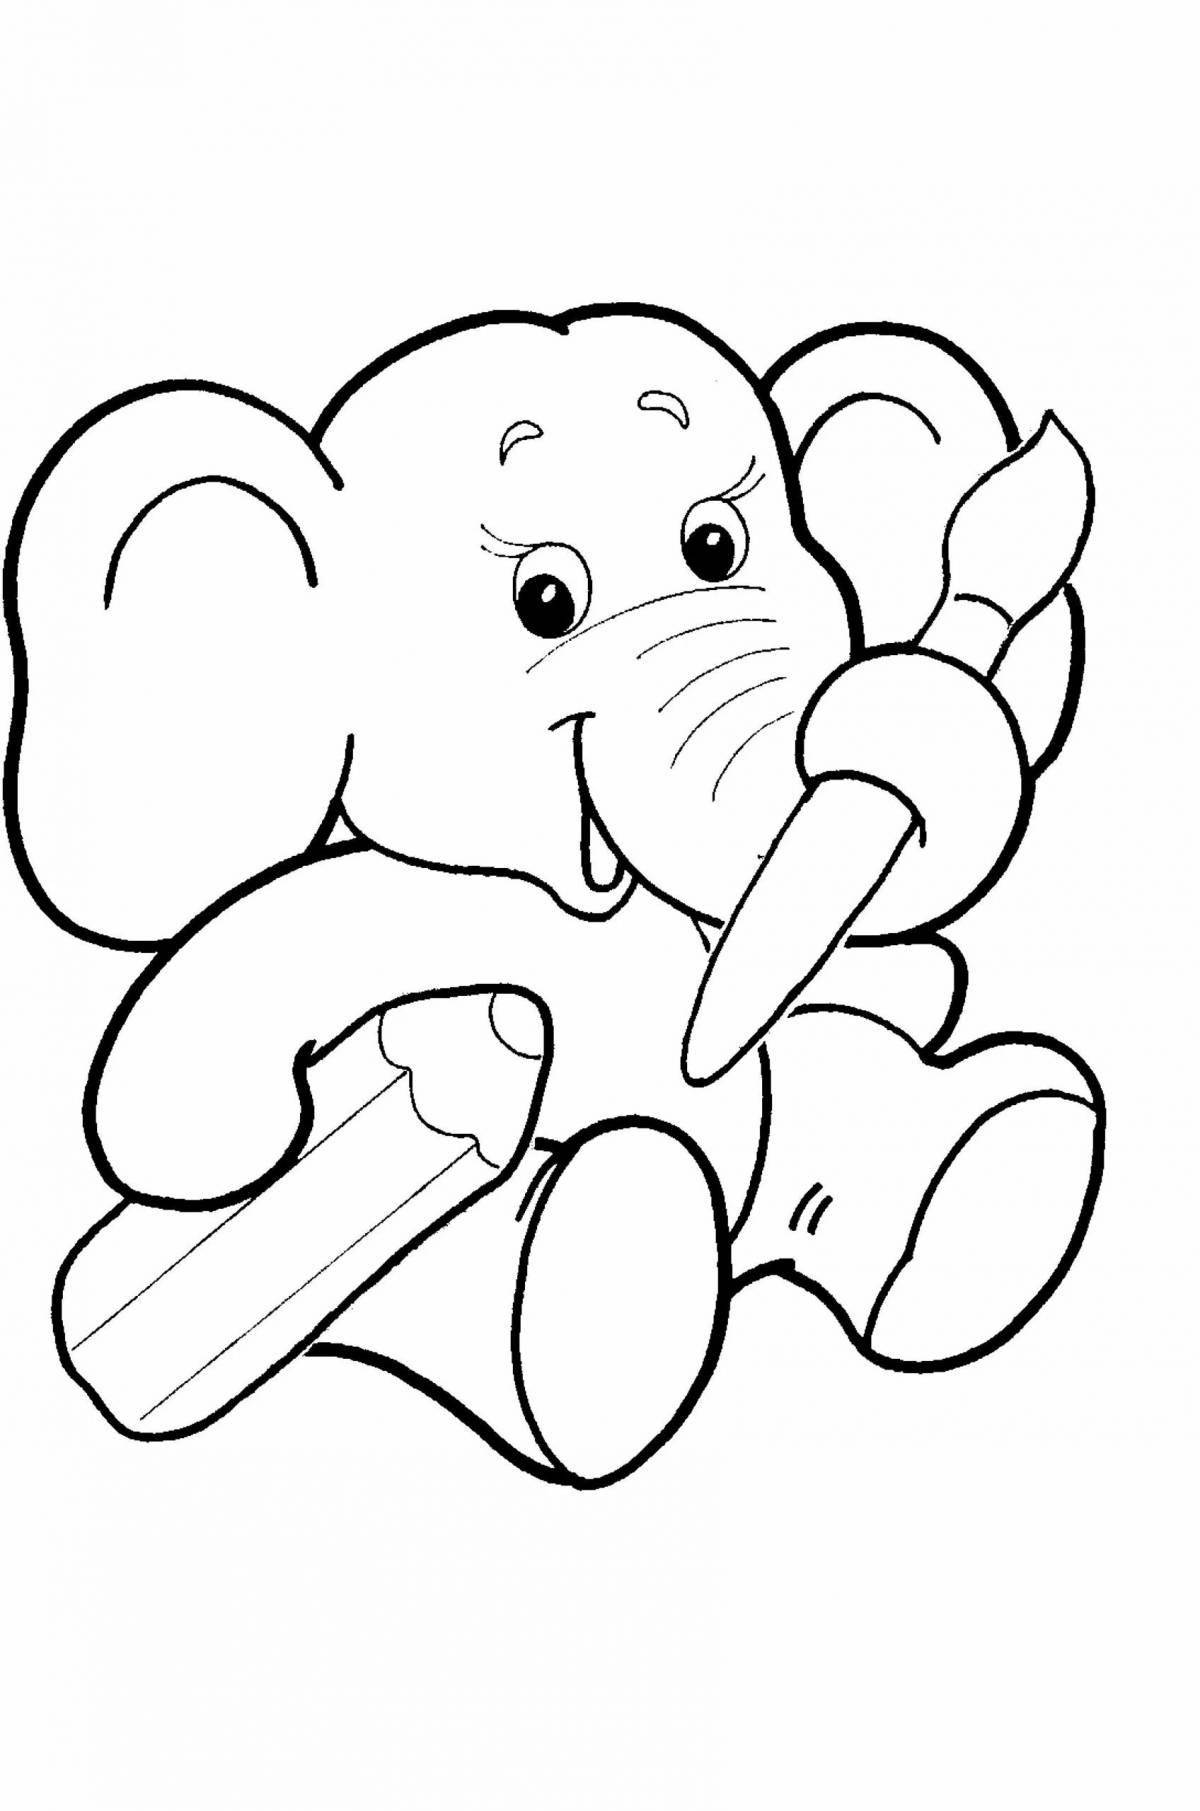 Fun coloring book for 4-5 year old child